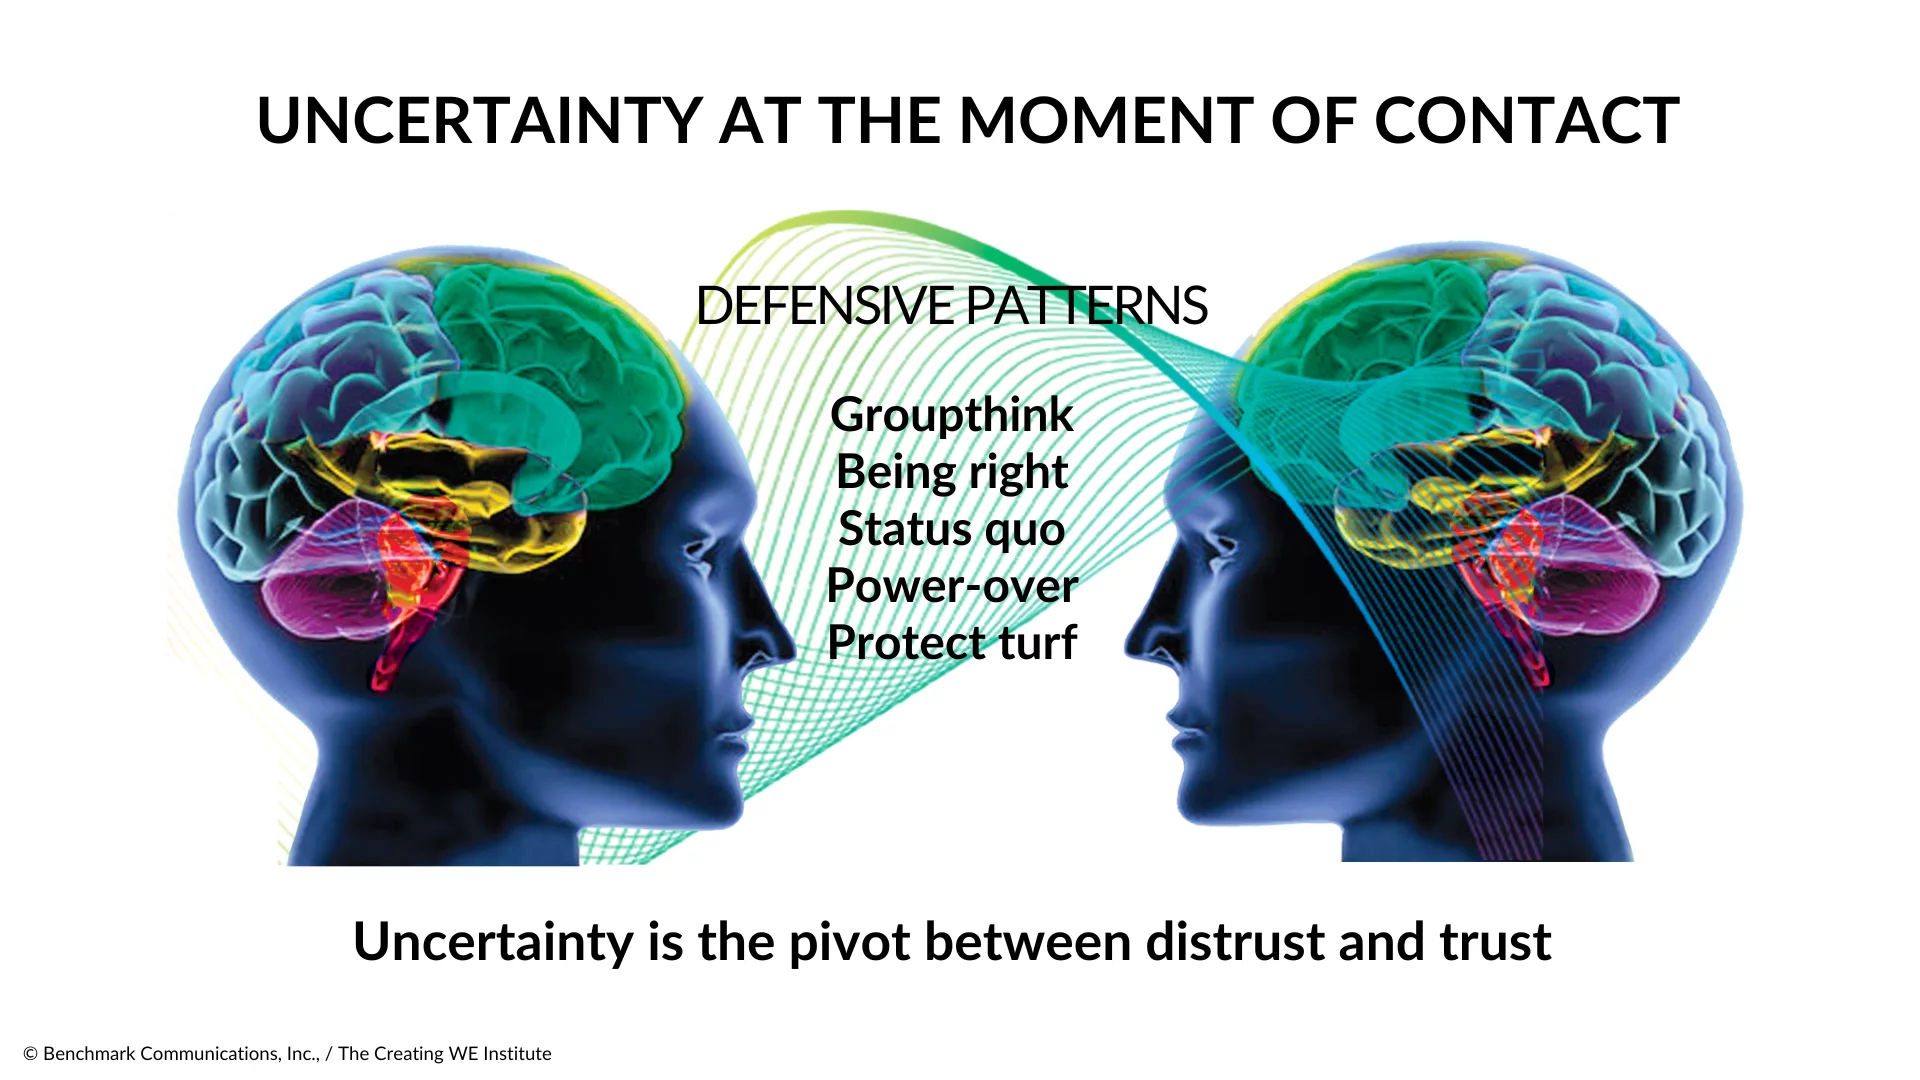 Uncertainty at the moment of contact - C-IQ Foundation of Trust Image